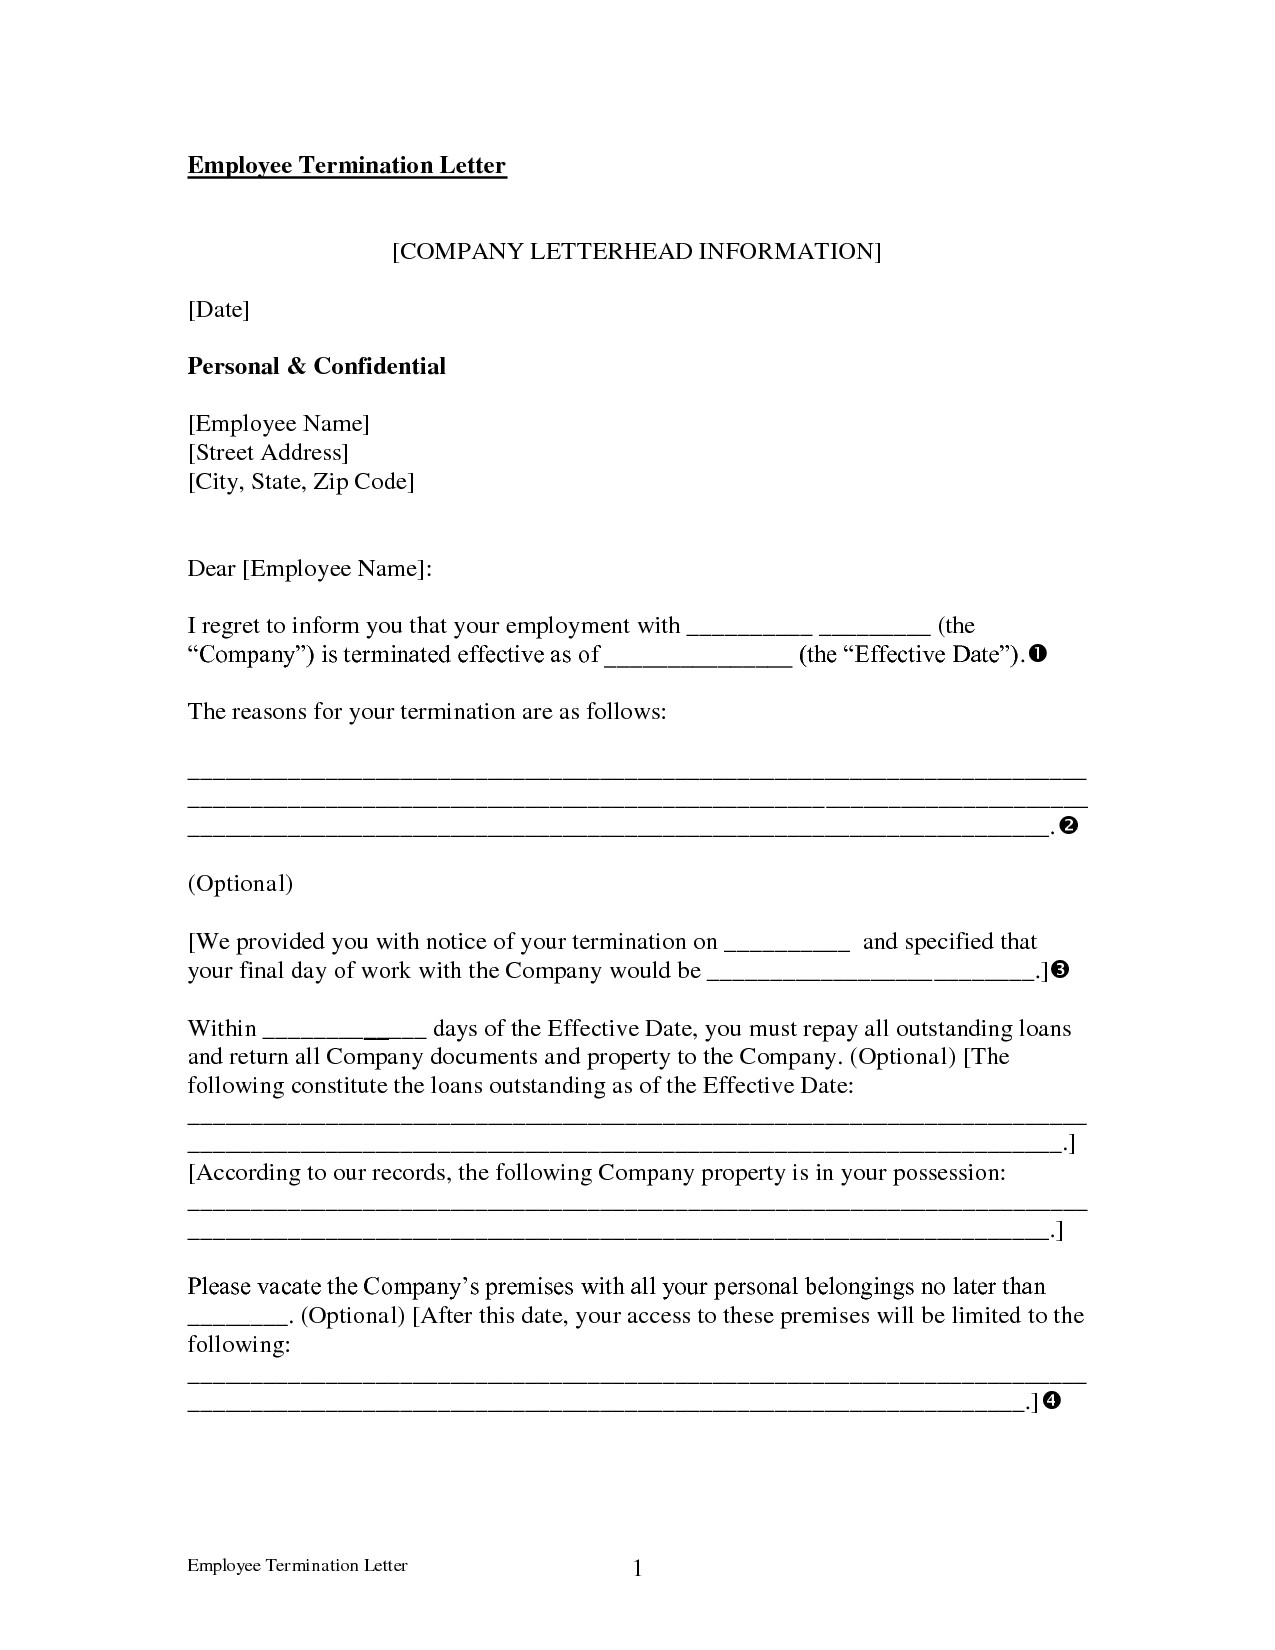 Business Termination Letter Template - 40 New Termination Employment Letter Sample